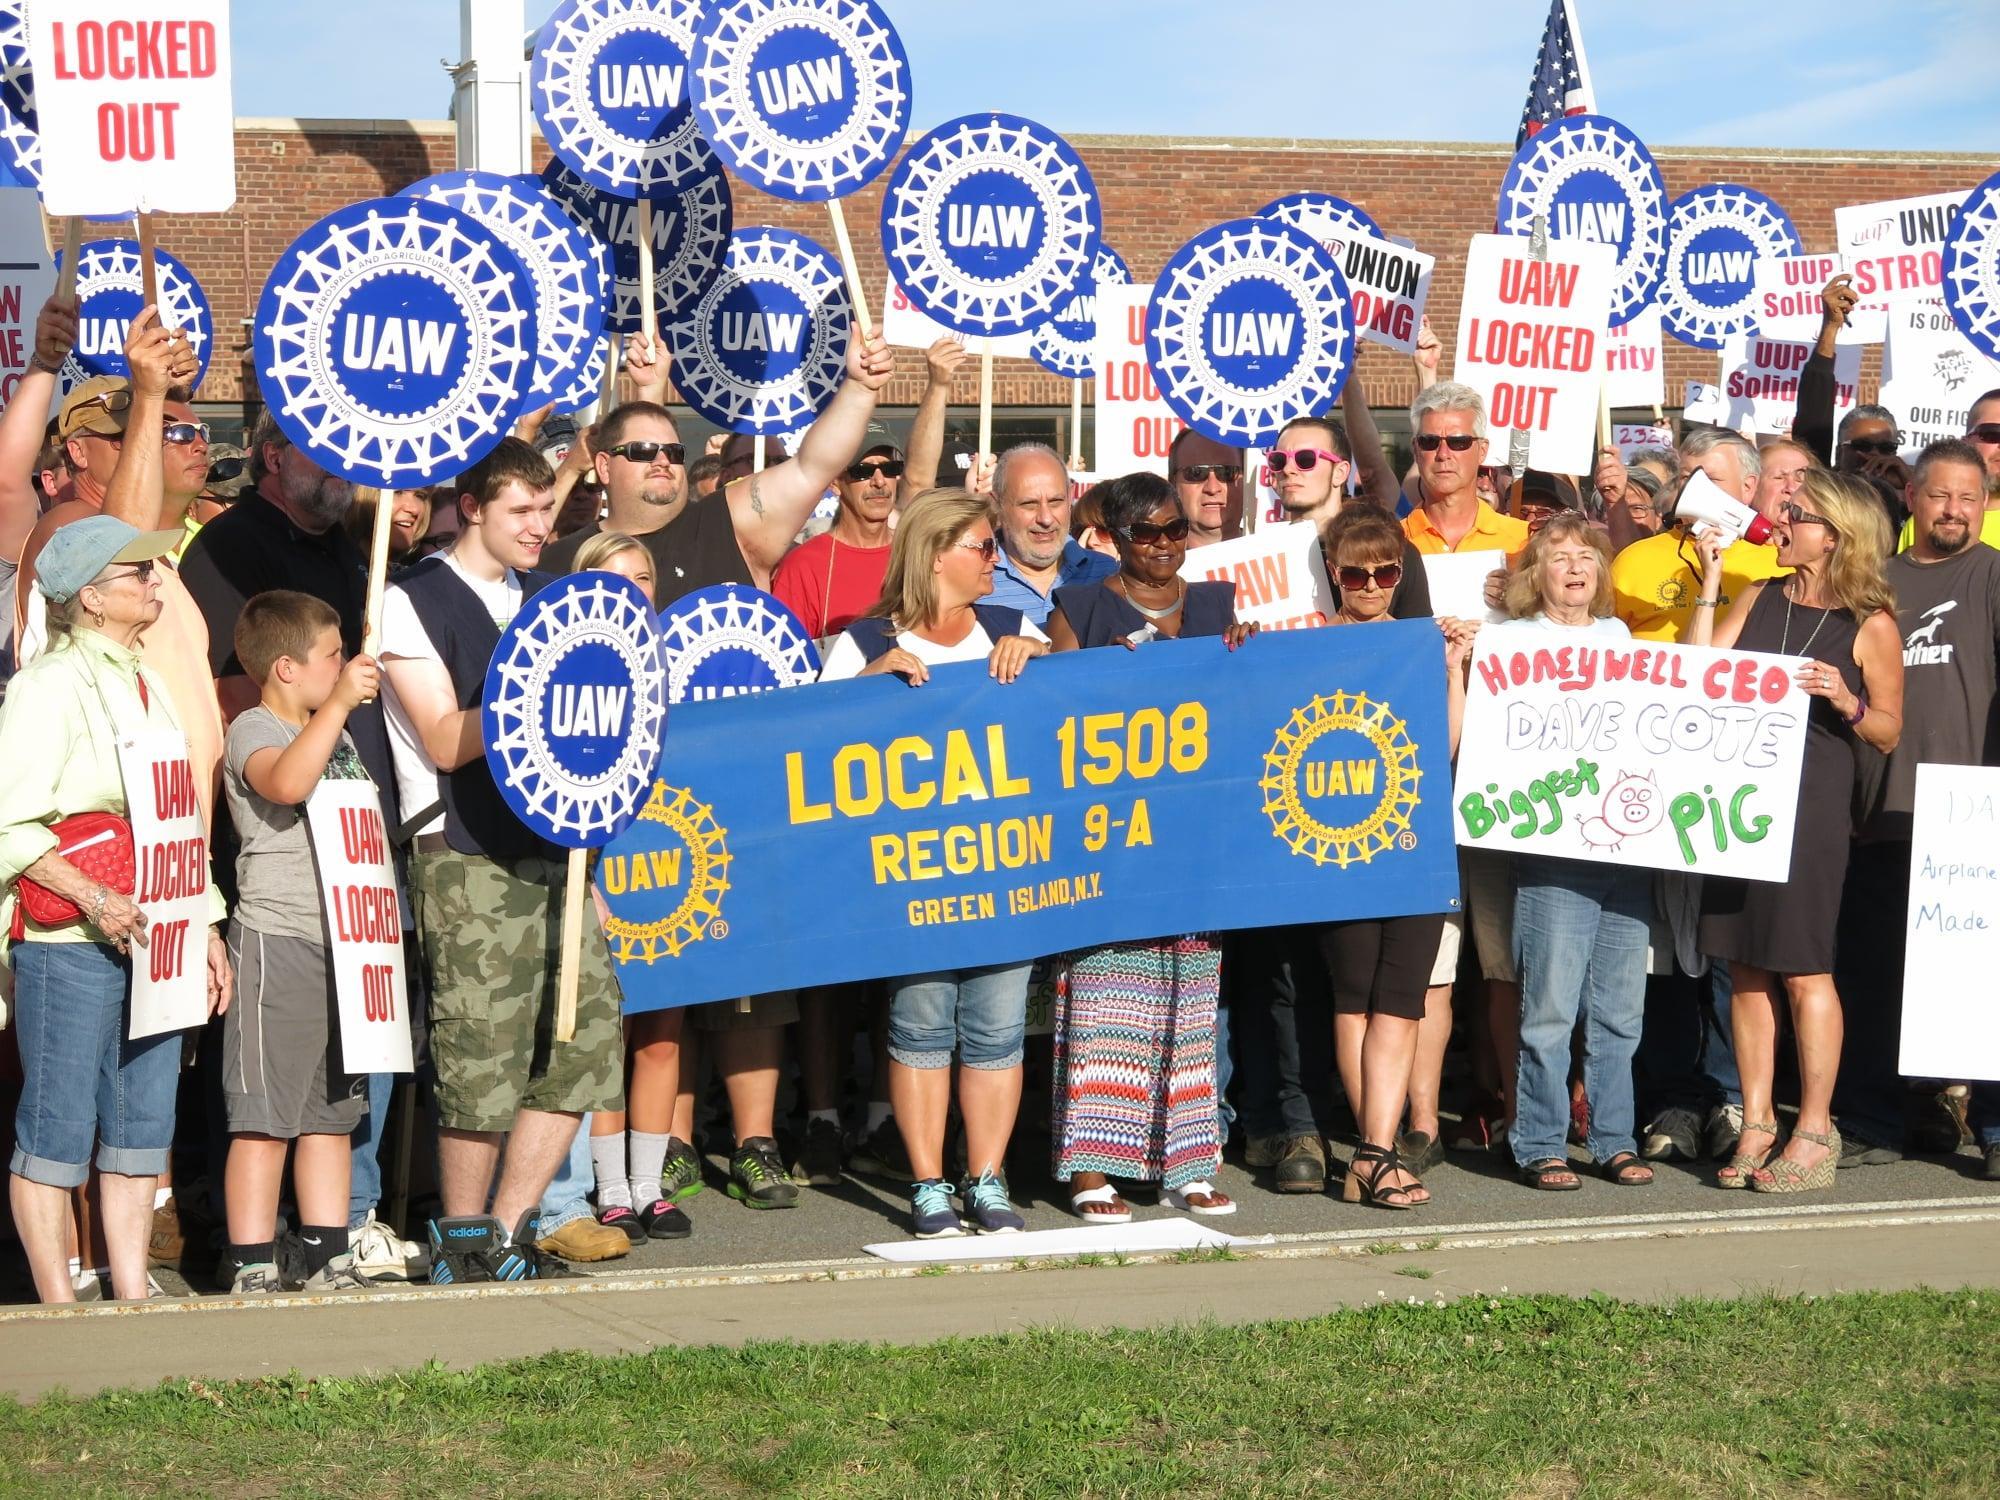 UAW Local 1508 Rally